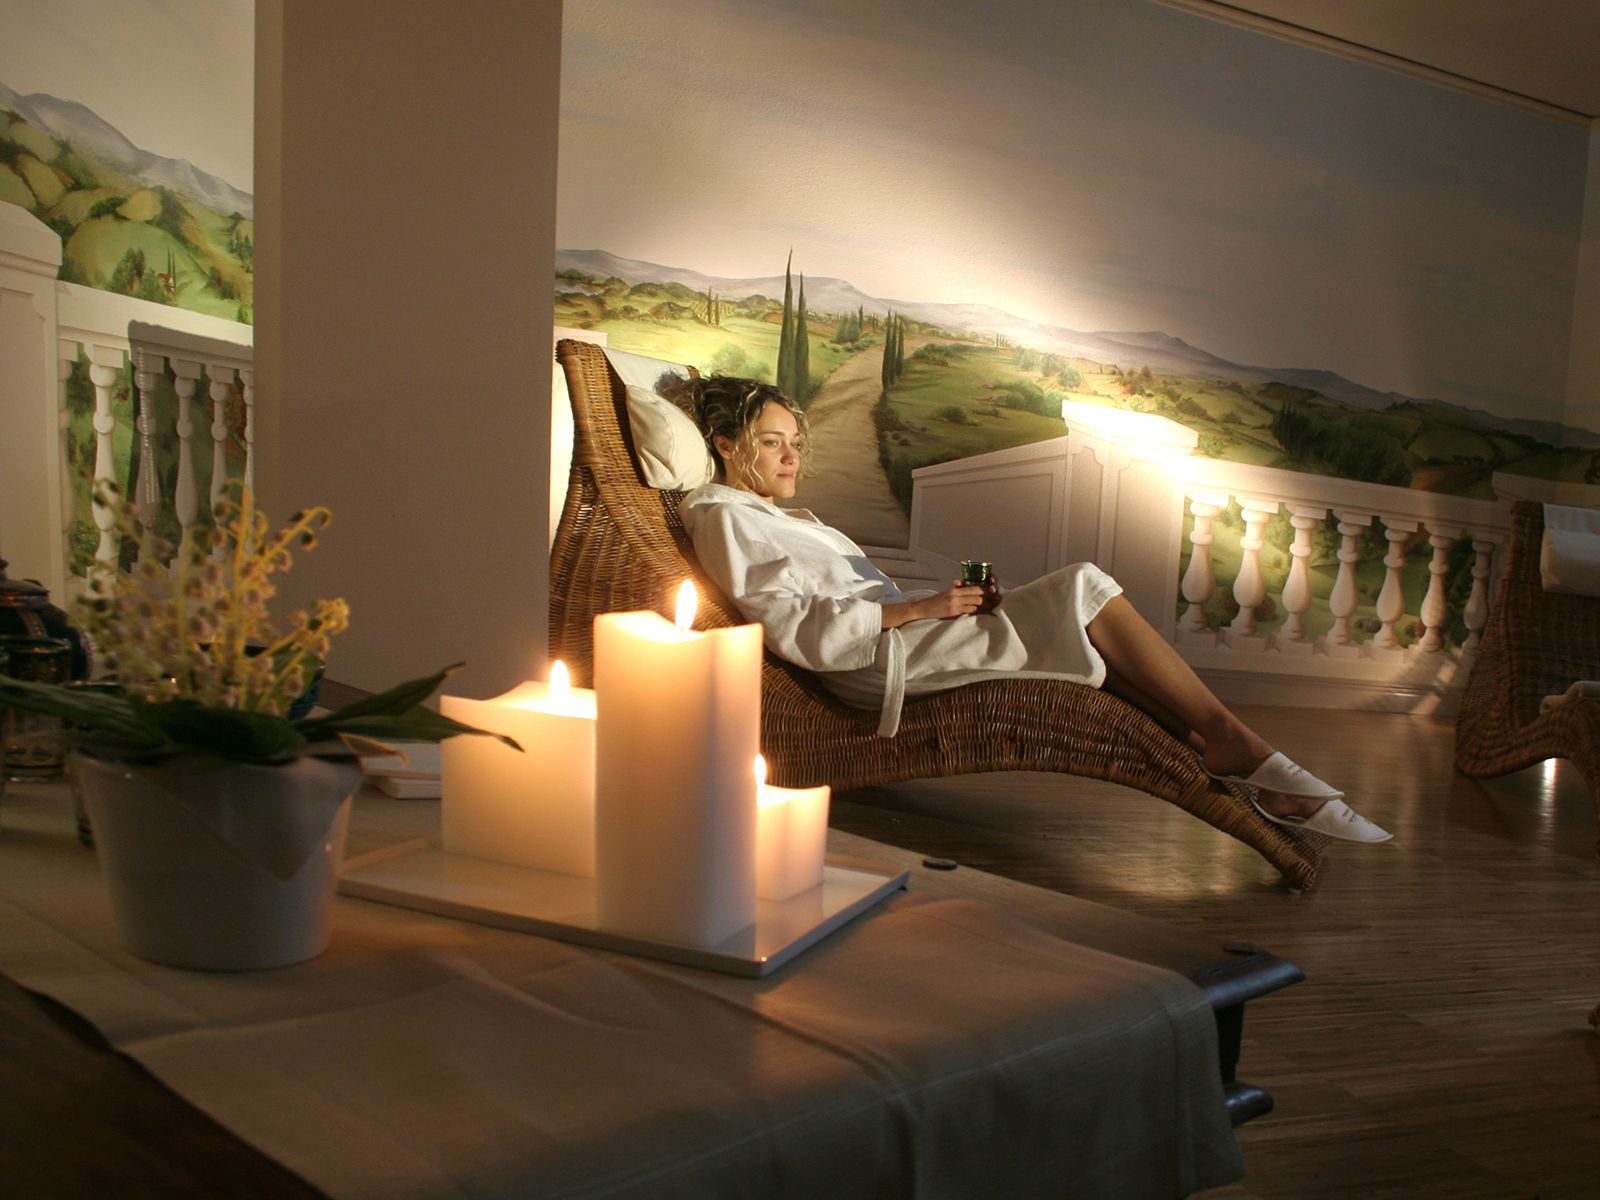 Spa 1 night 1 day, Special 'Food & Beauty Light' Romance room